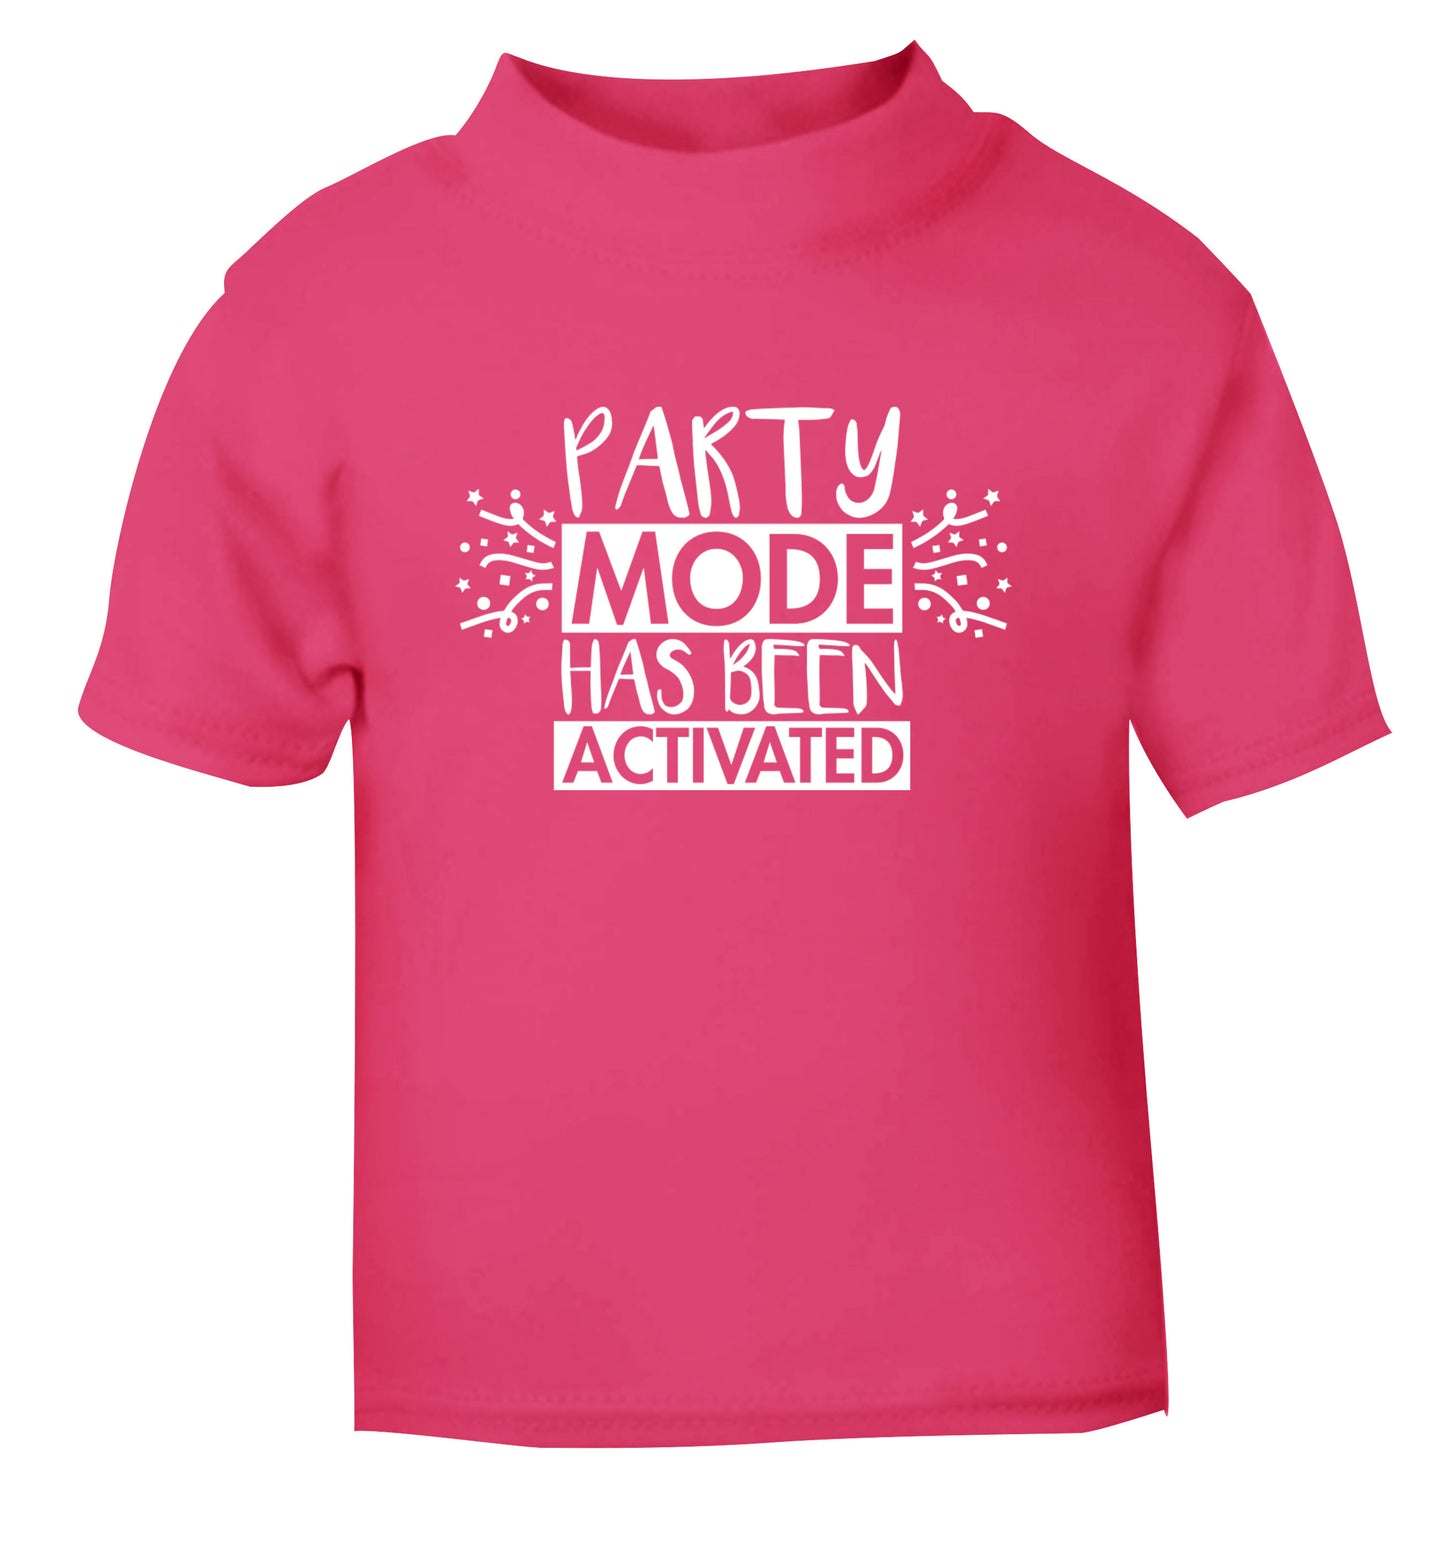 Please do not disturb party mode has been activated pink Baby Toddler Tshirt 2 Years